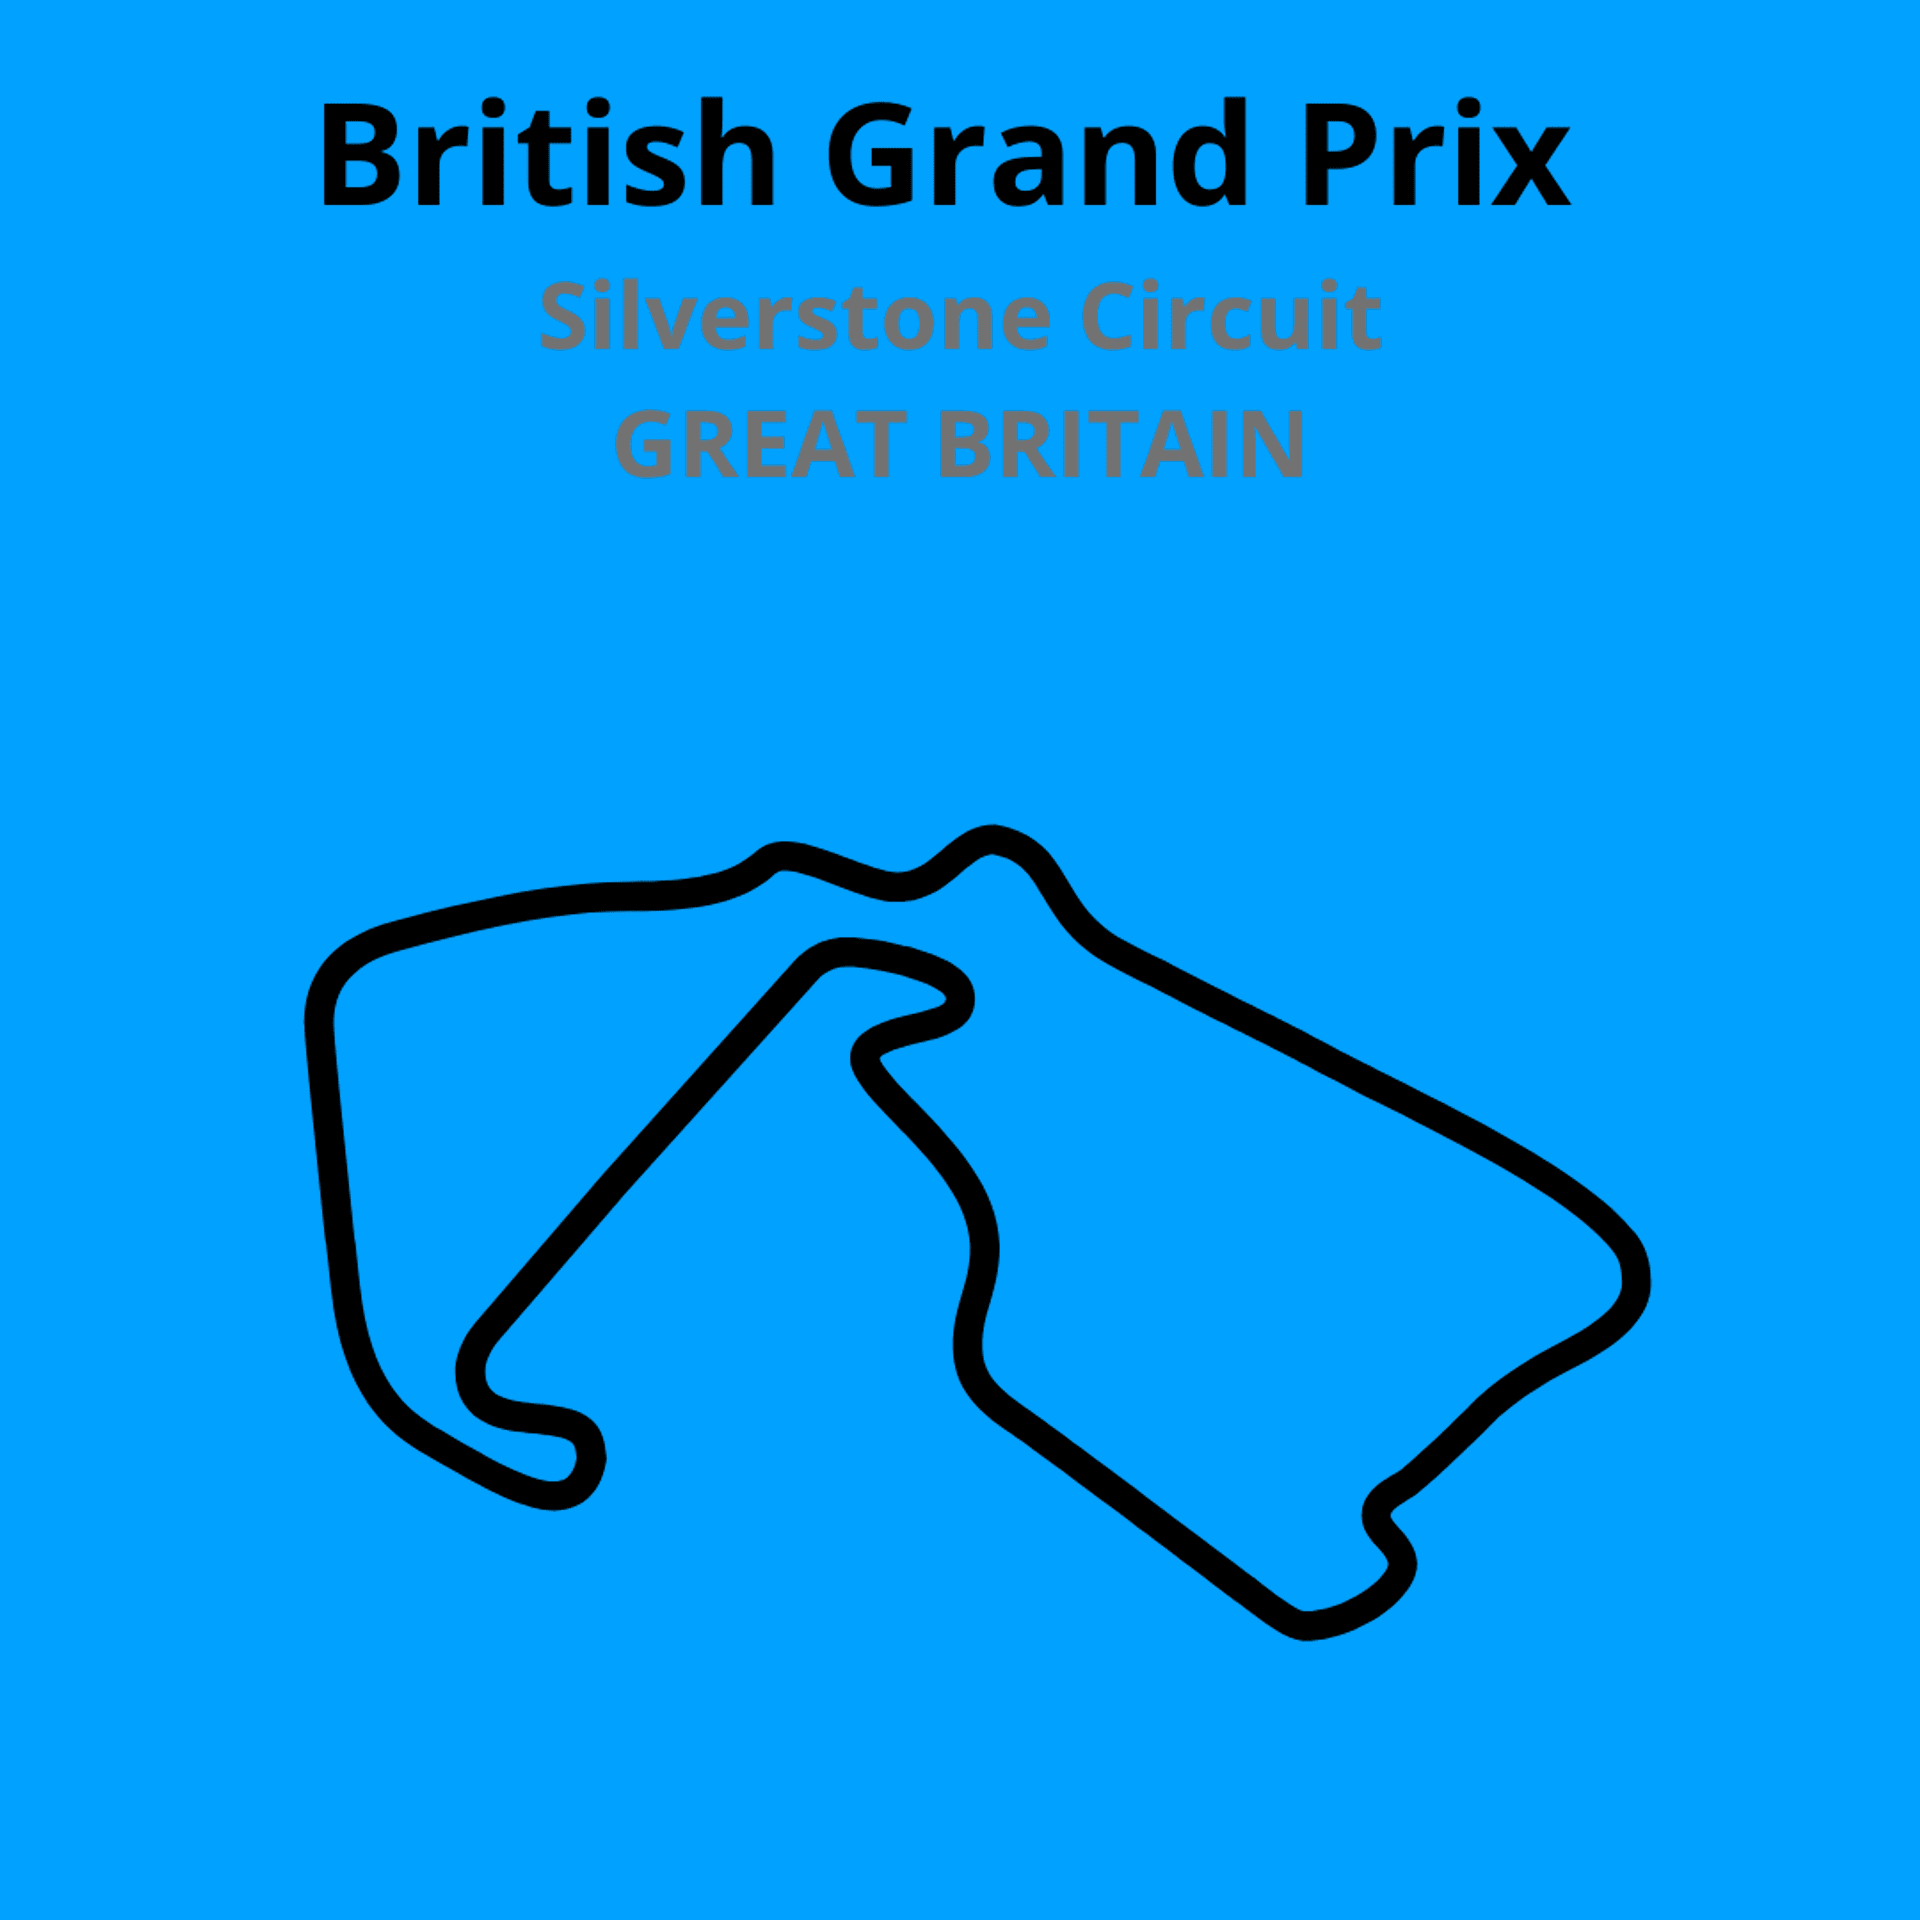 British Gand Prix. Discover all the races of the moto world championship 2021. the characteristics of every circuit, the records and difficulties. 